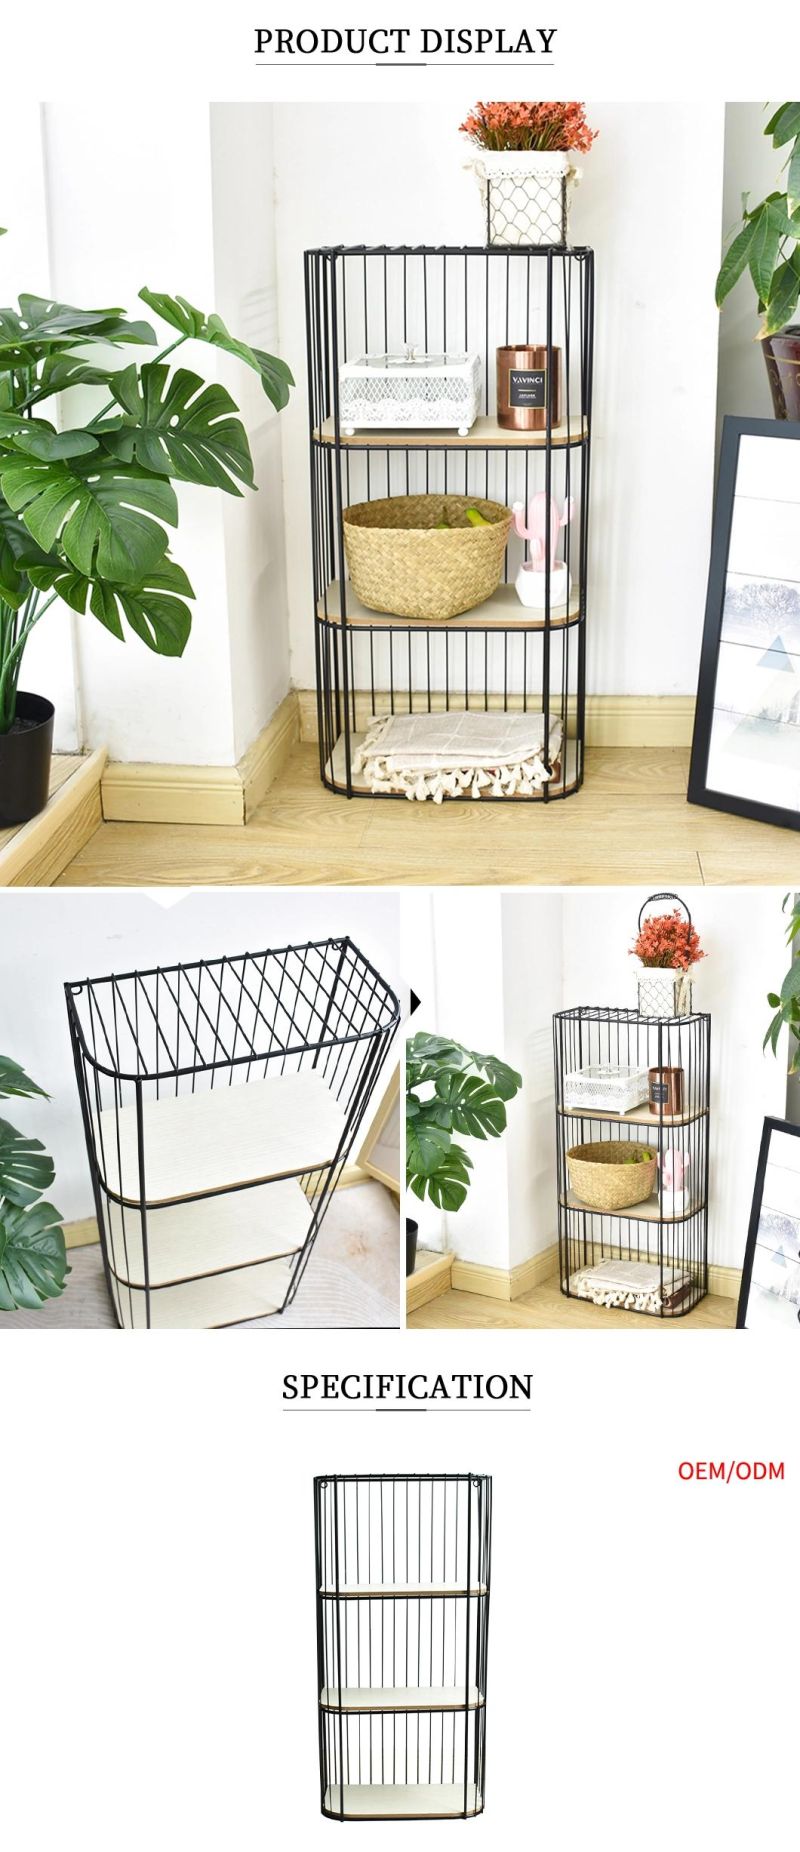 High Quality Unfolded Metal Storage Shelf Functional Furniture for Home Office Hotel